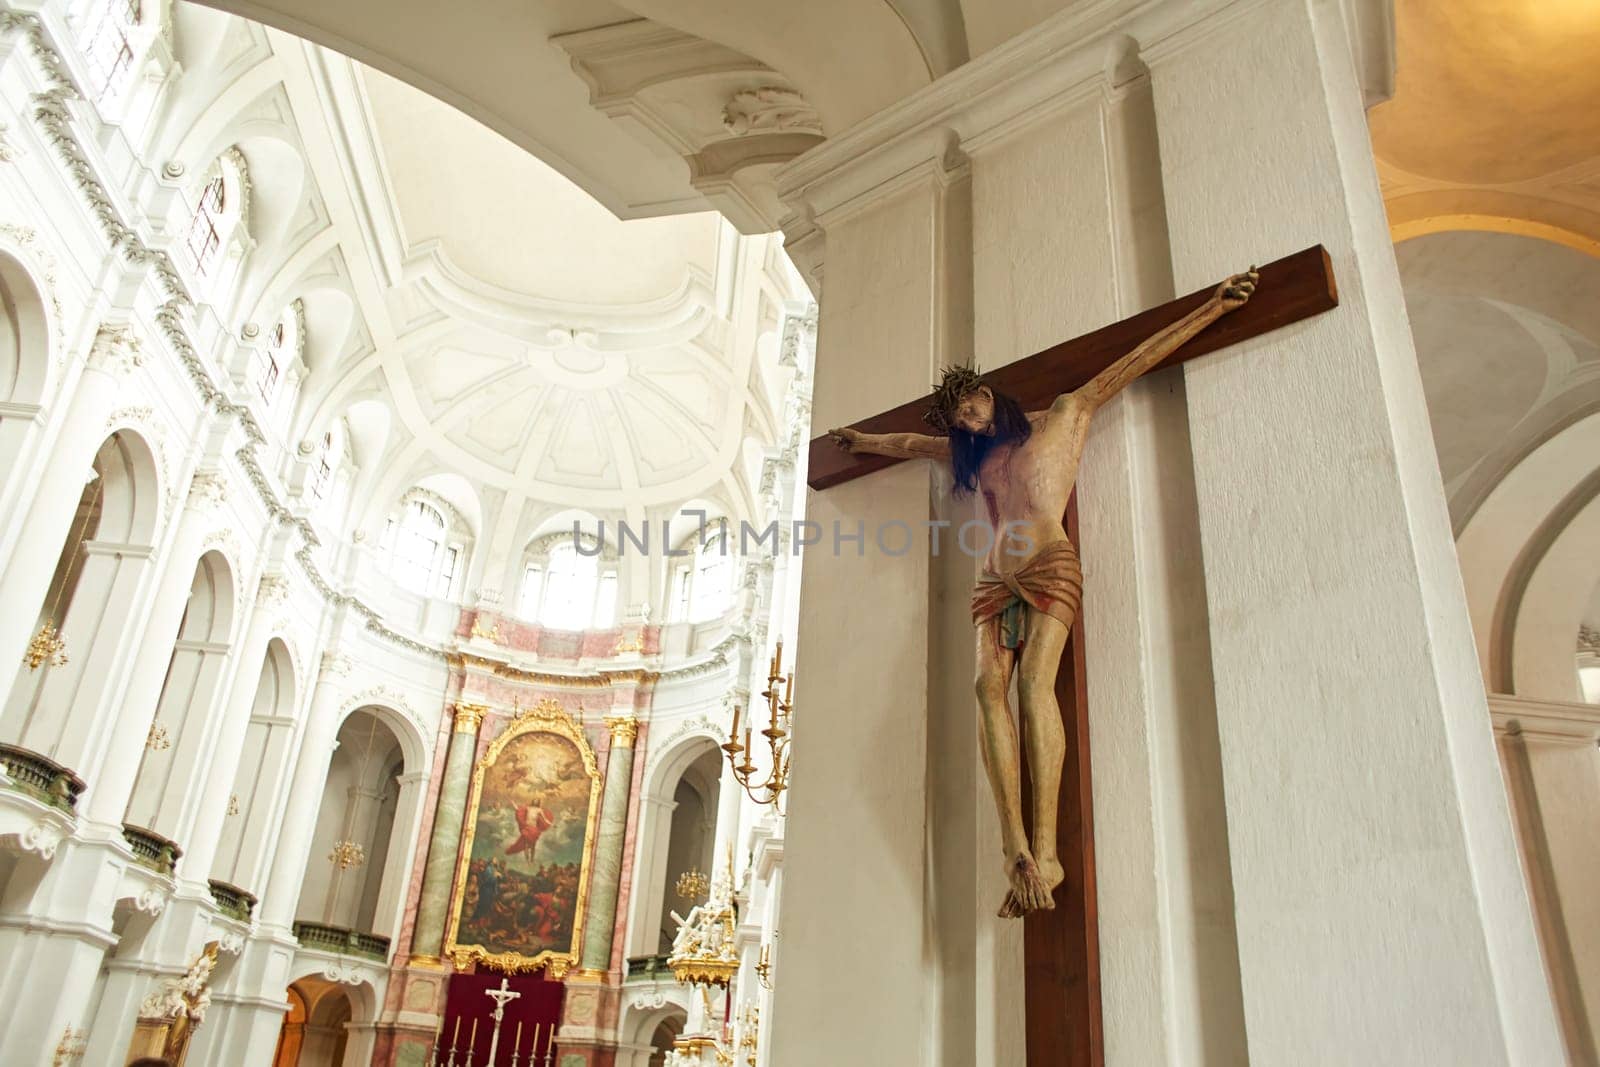 Jesus Christ on the Crucifixion in the Christian Church by Try_my_best